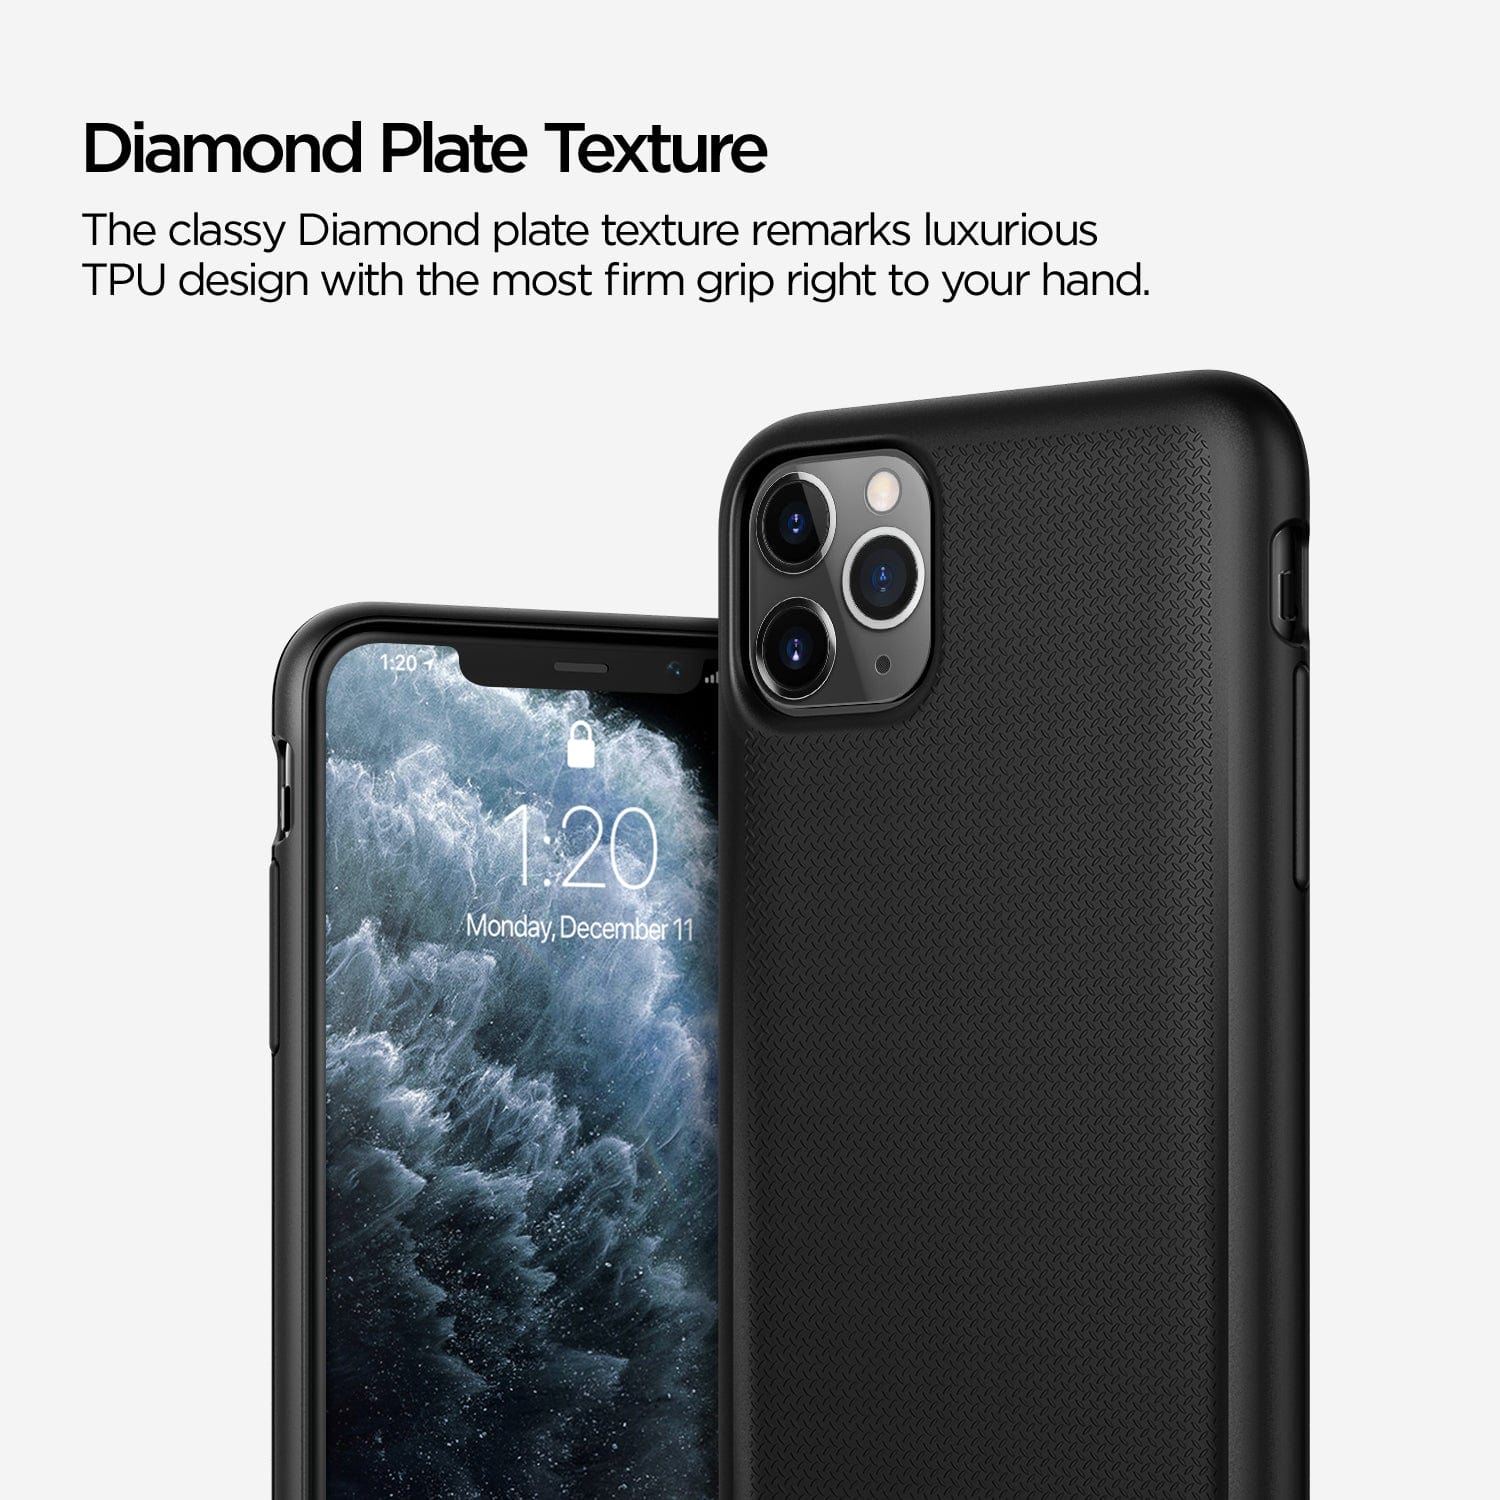 Our Classy Diamond Plate Texture and Luxurious TPU Design Provide Both Aesthetic Appeal and Firm Grip